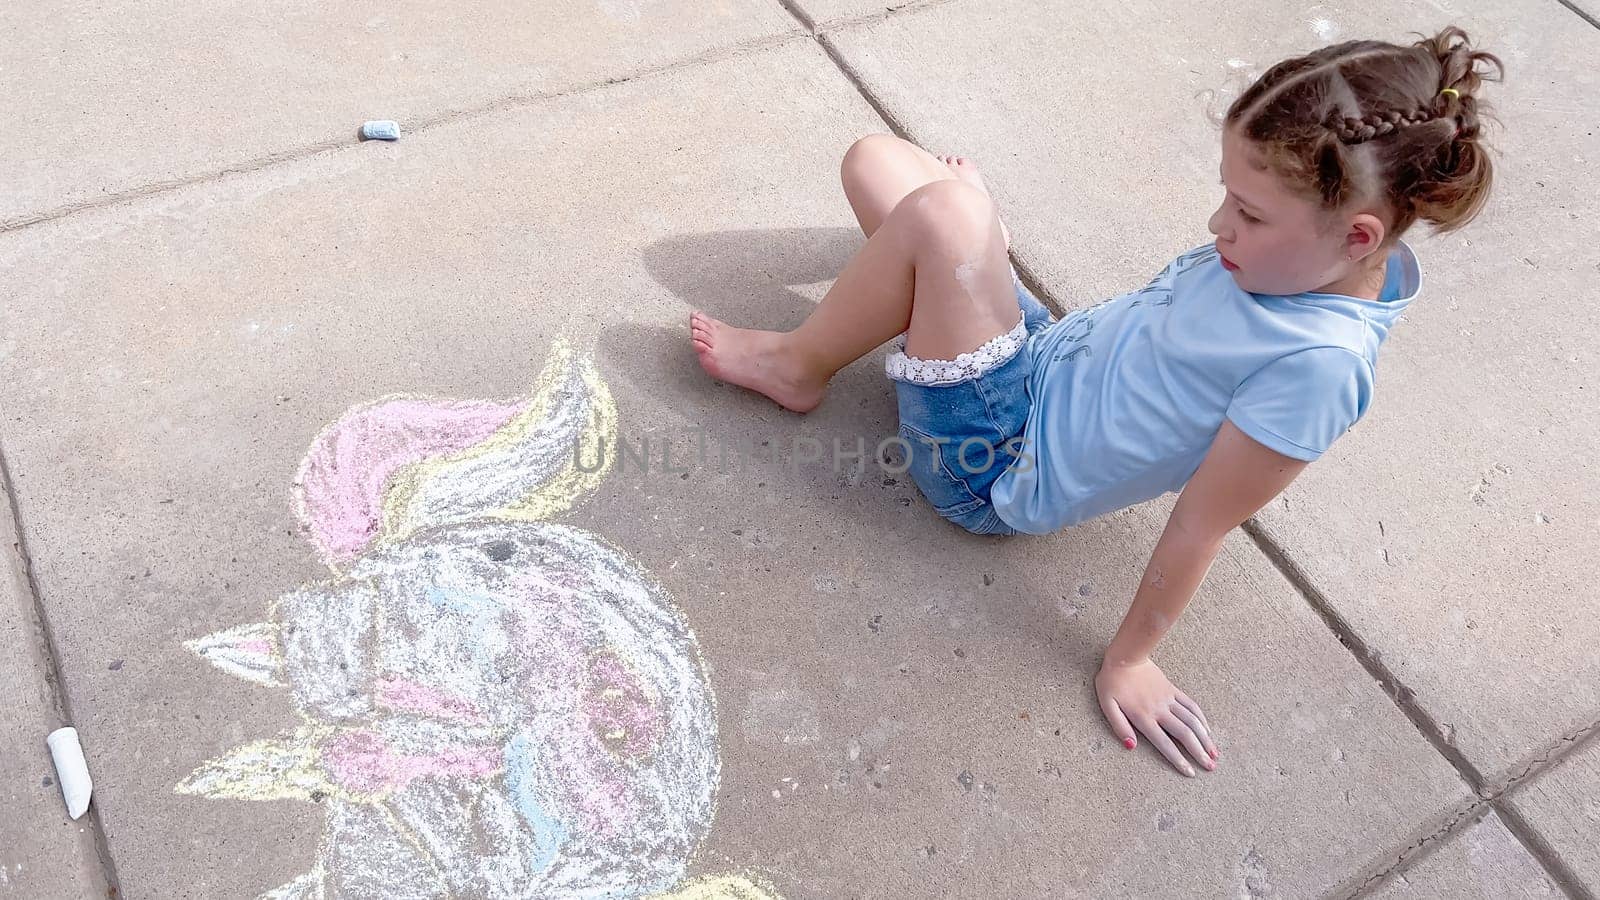 Little girl drawing chalk art on a suburban driveway on a summer day.